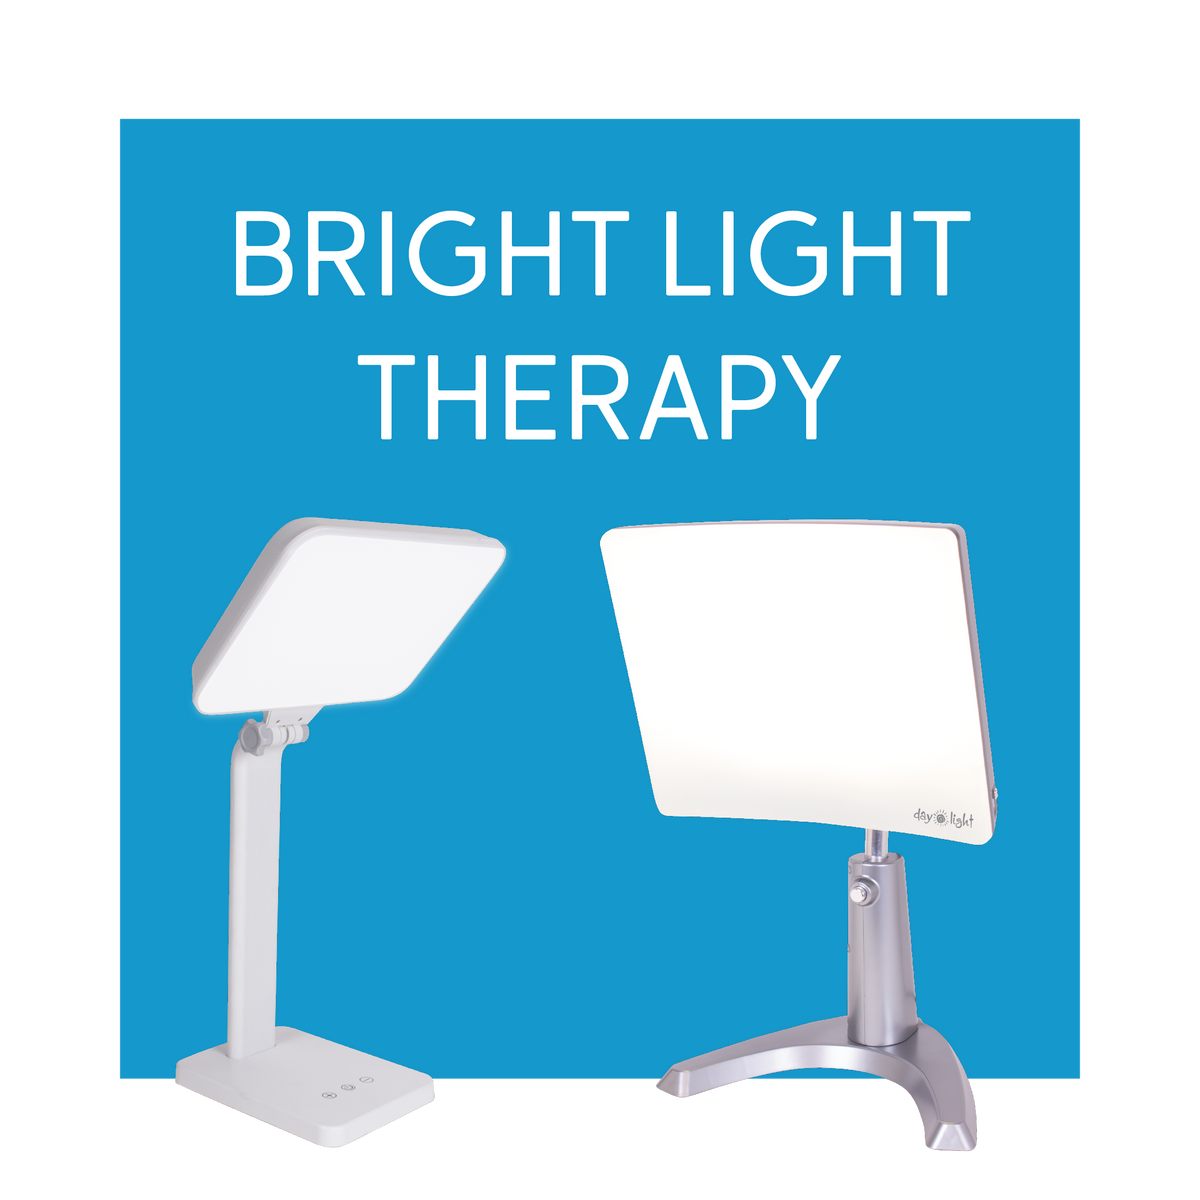 Two light therapy lamps with text, bright light therapy